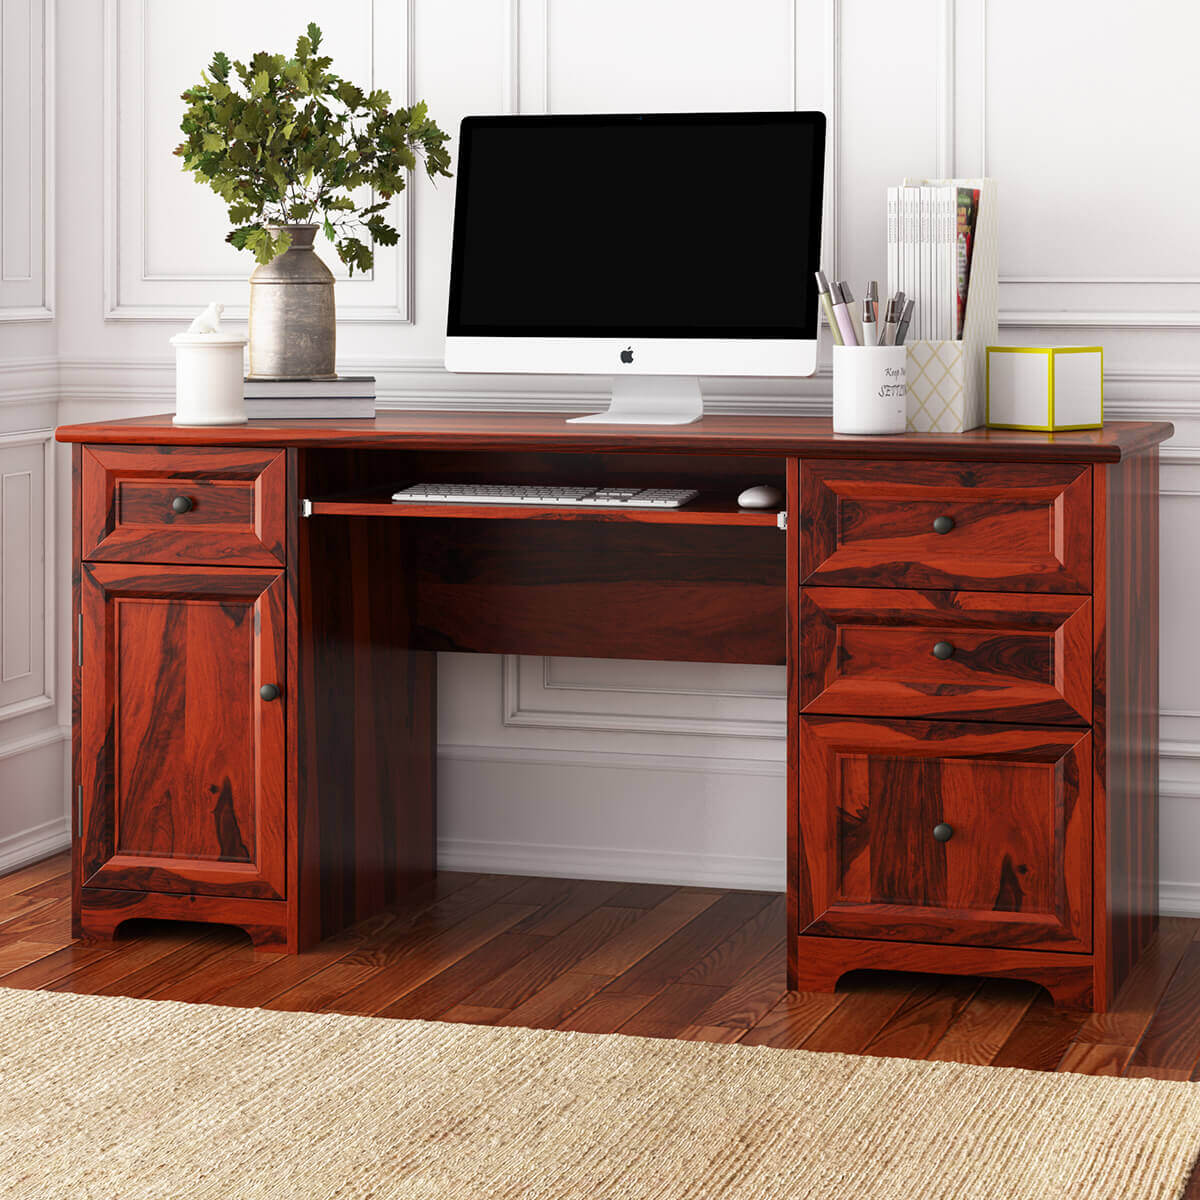 https://www.sierralivingconcepts.com/images/thumbs/0398039_poston-rustic-solid-wood-4-drawer-62-inch-large-home-office-computer-desk.jpeg